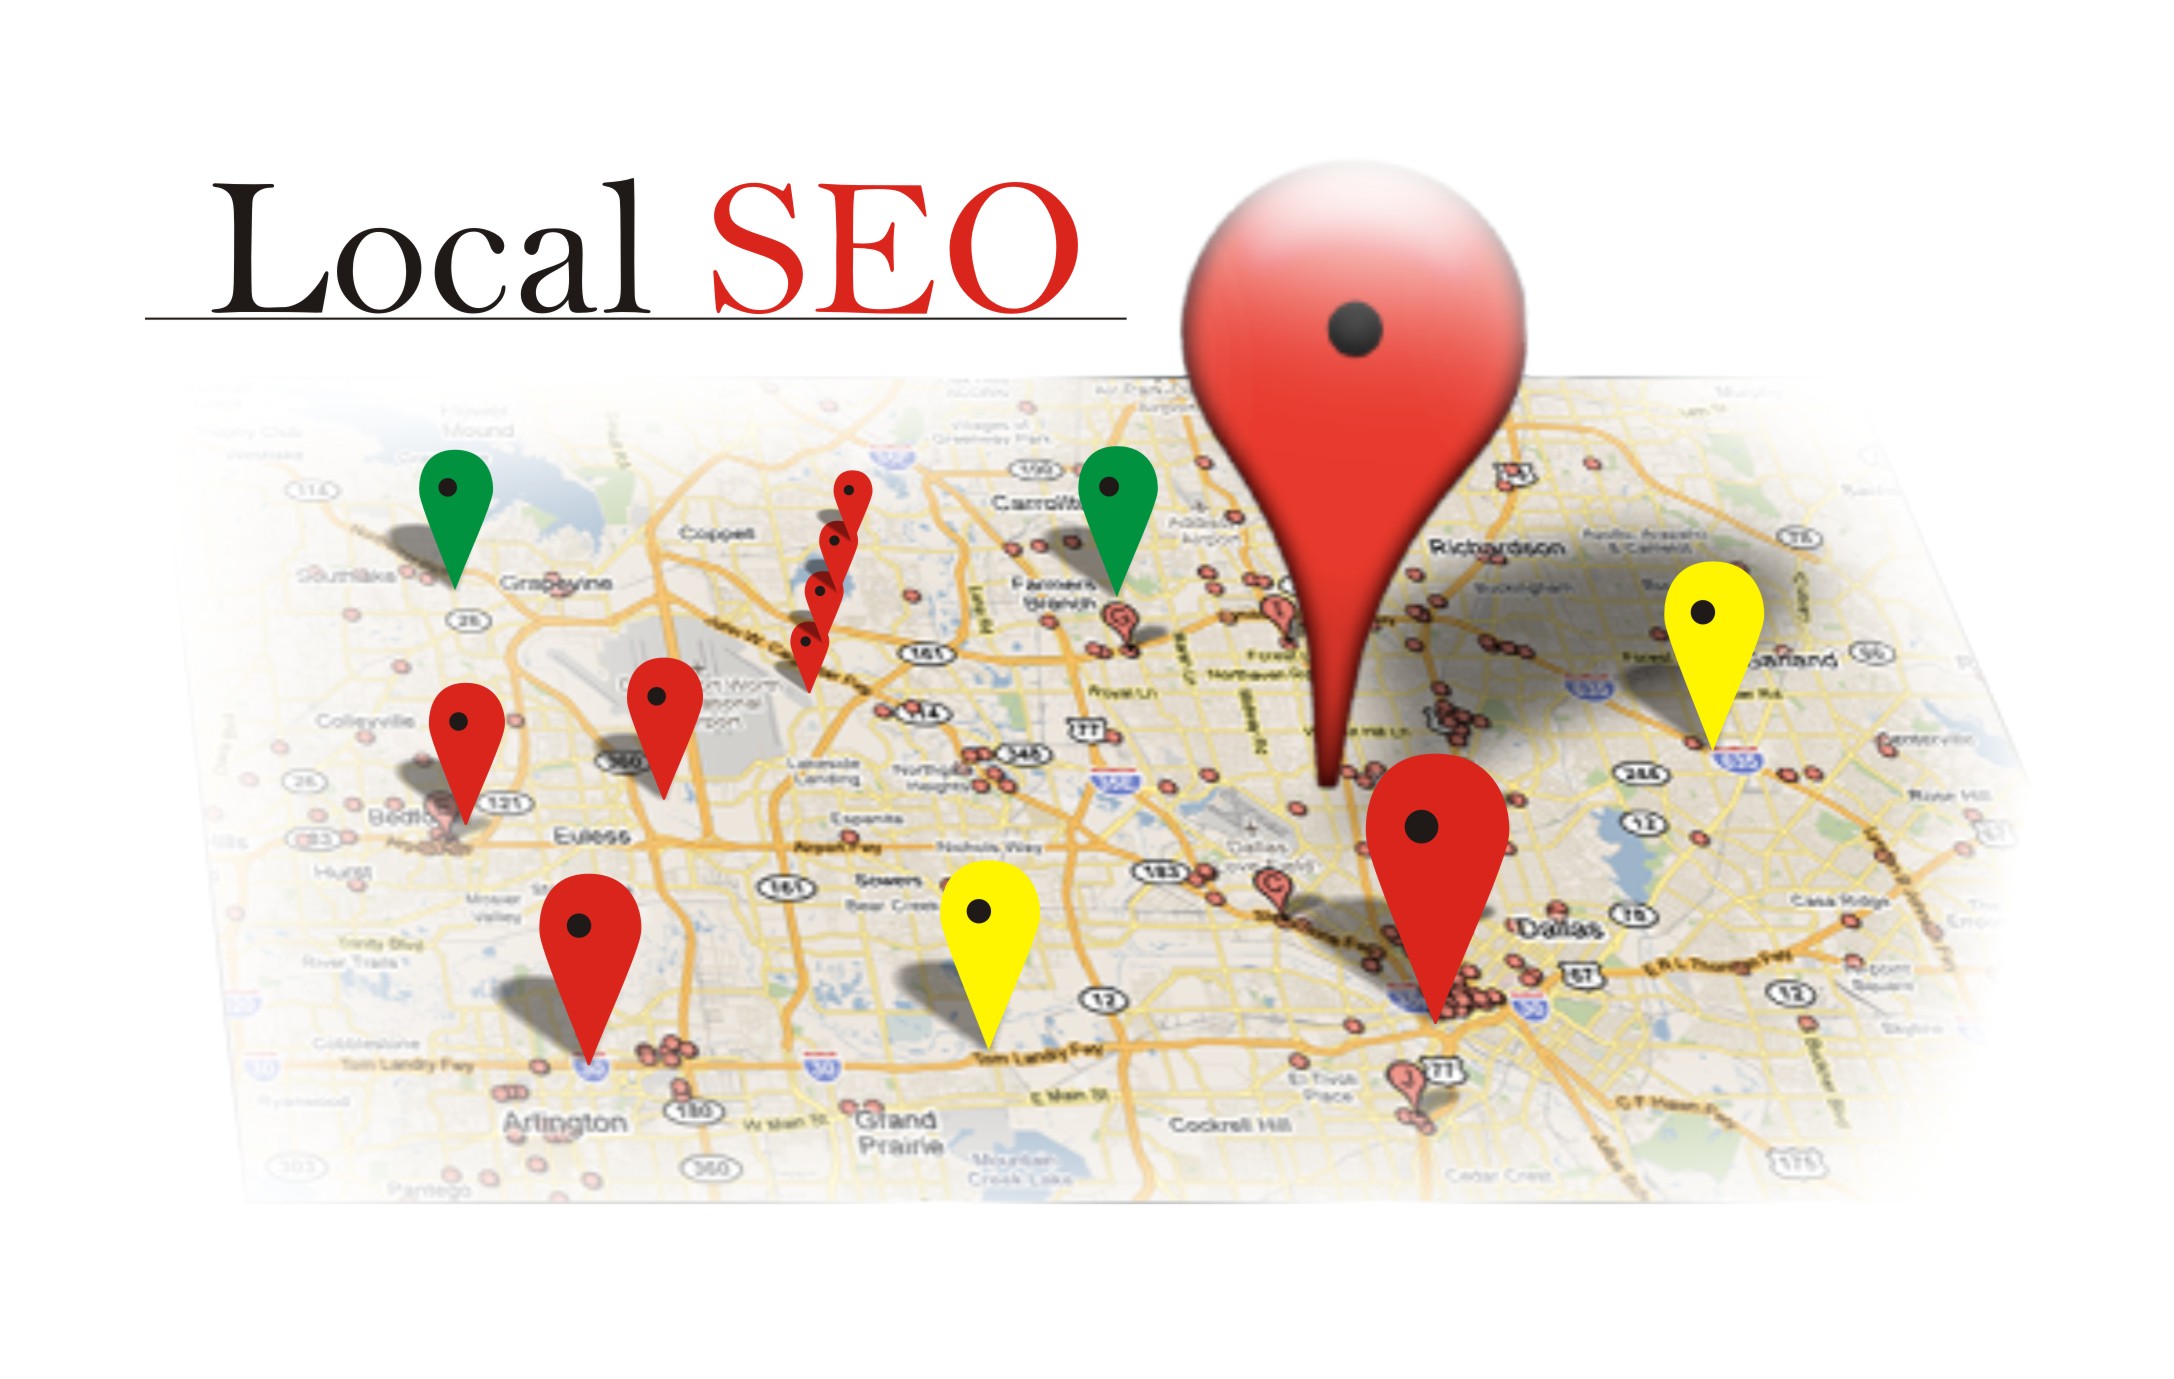 About Local SEO